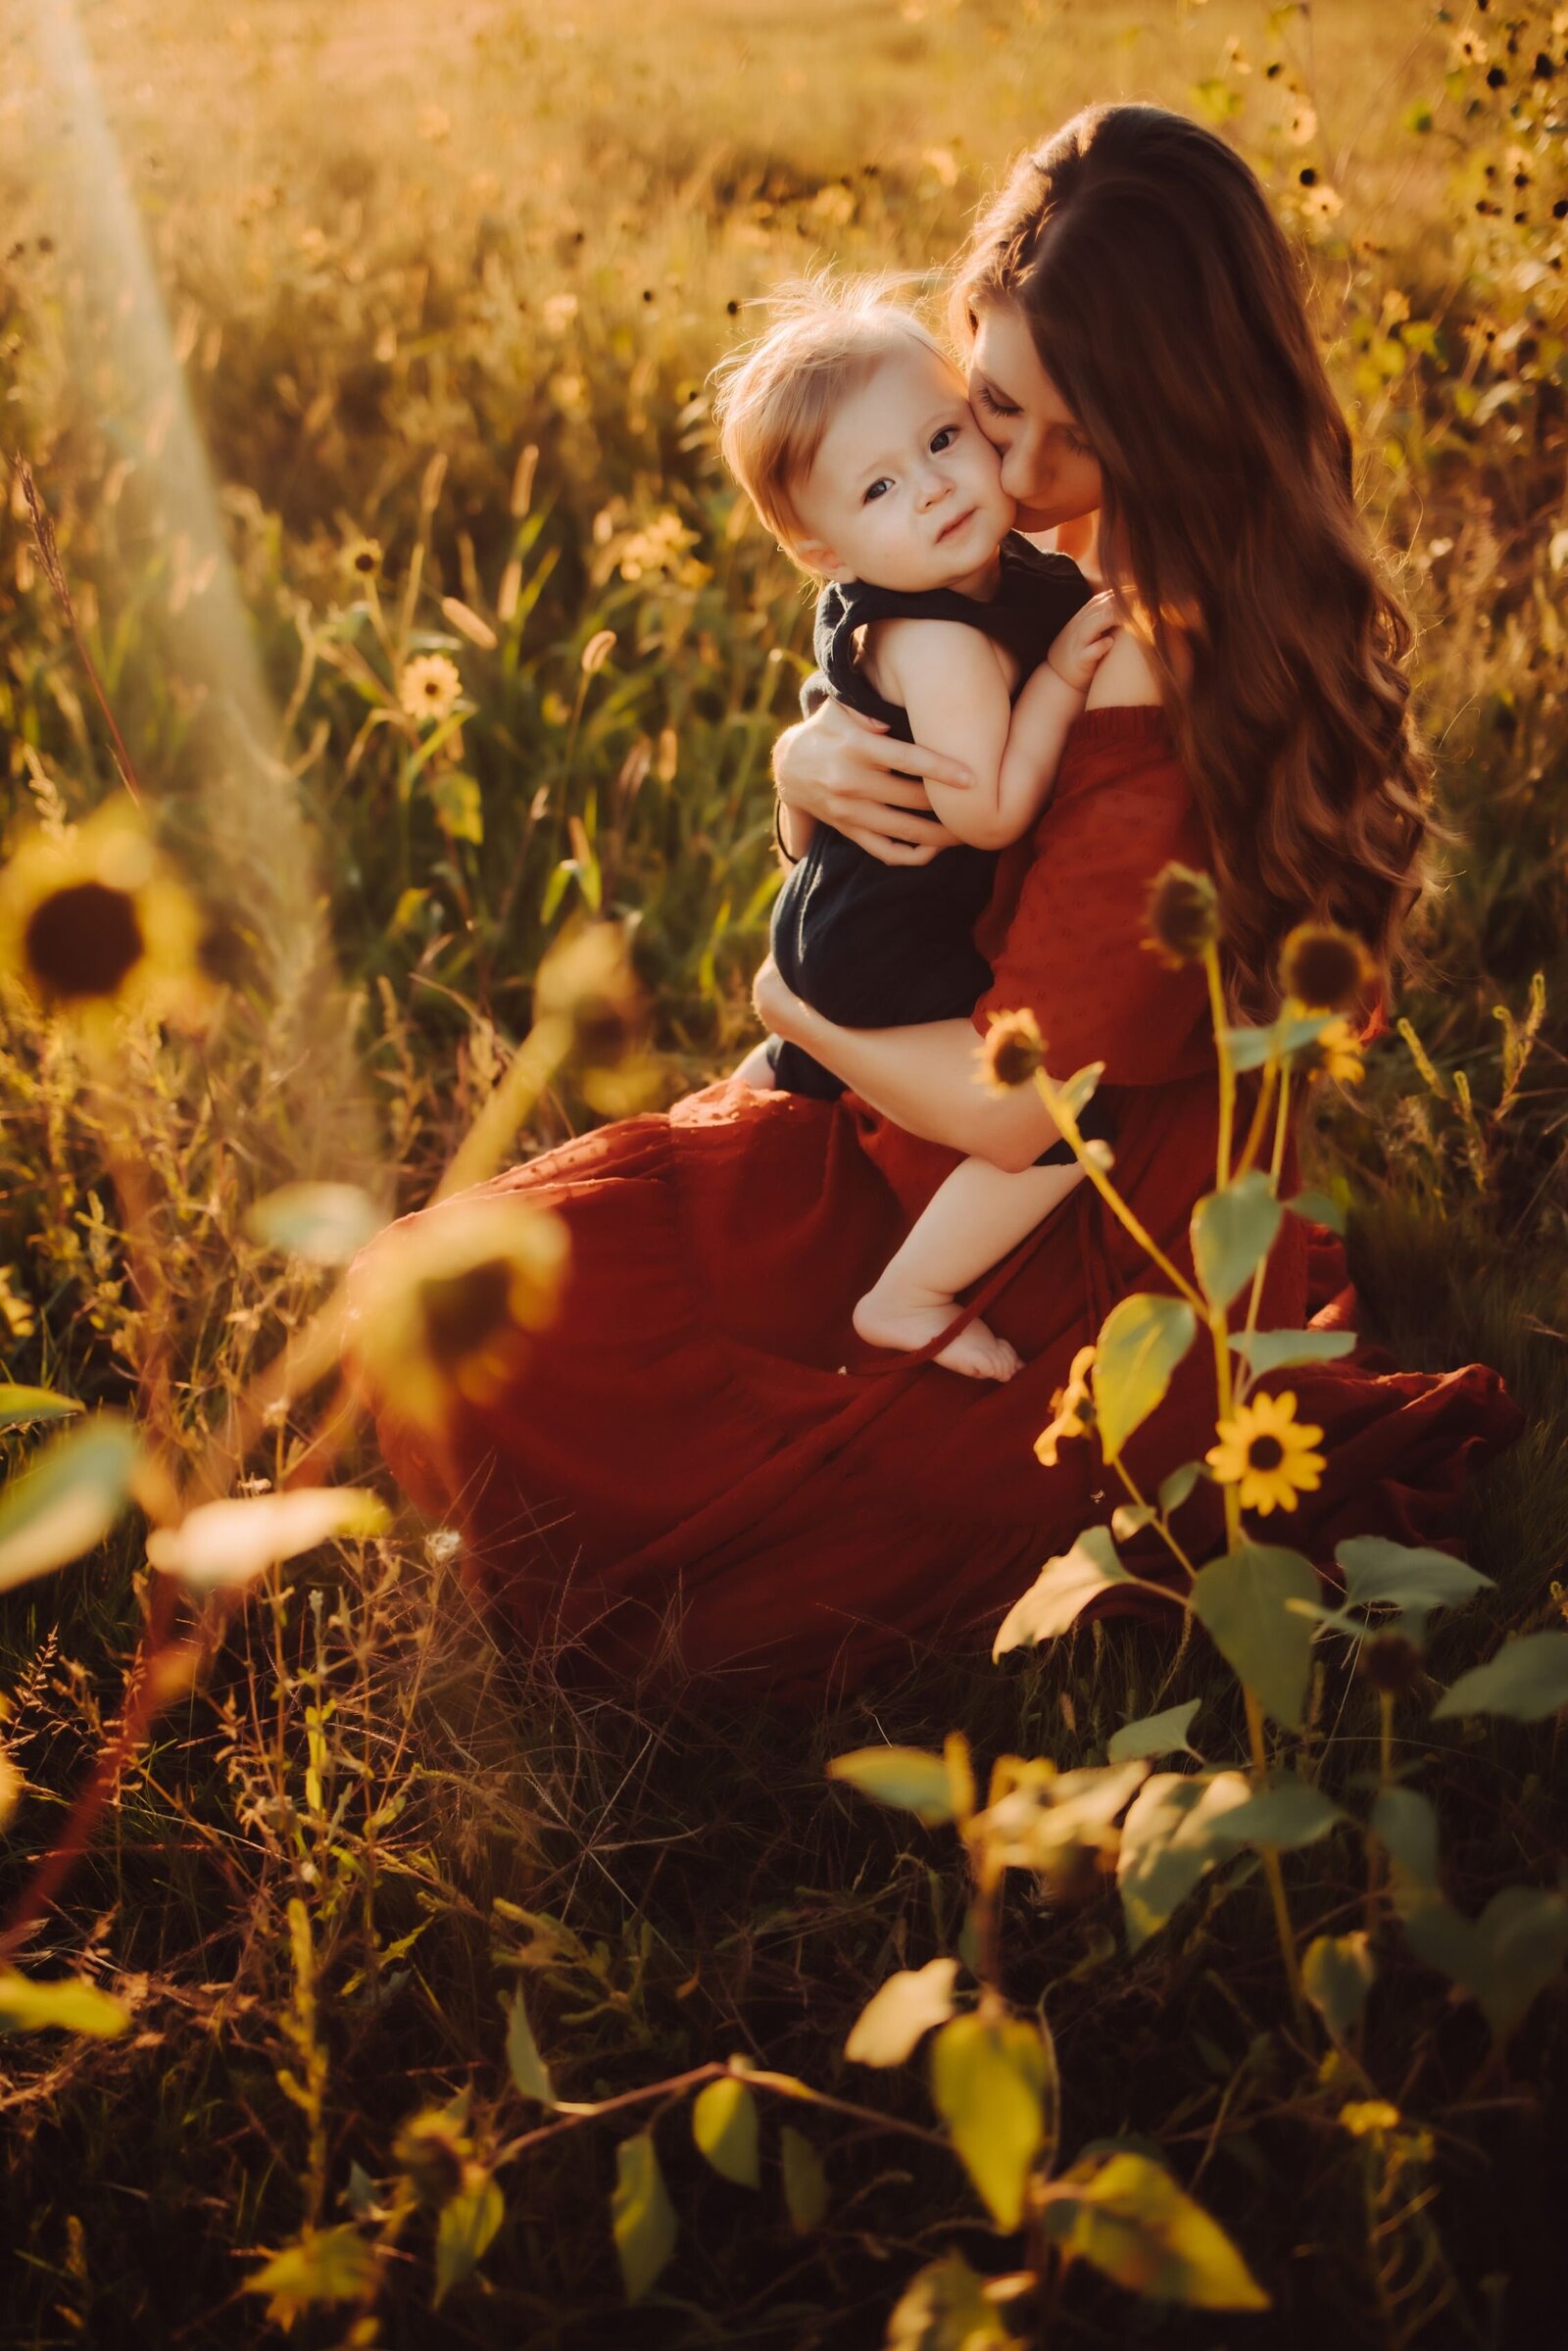 A woman in a red shirt holding her son close and grazing her lips against his cheeks while he looks into the camera during their mother/son family photoshoot